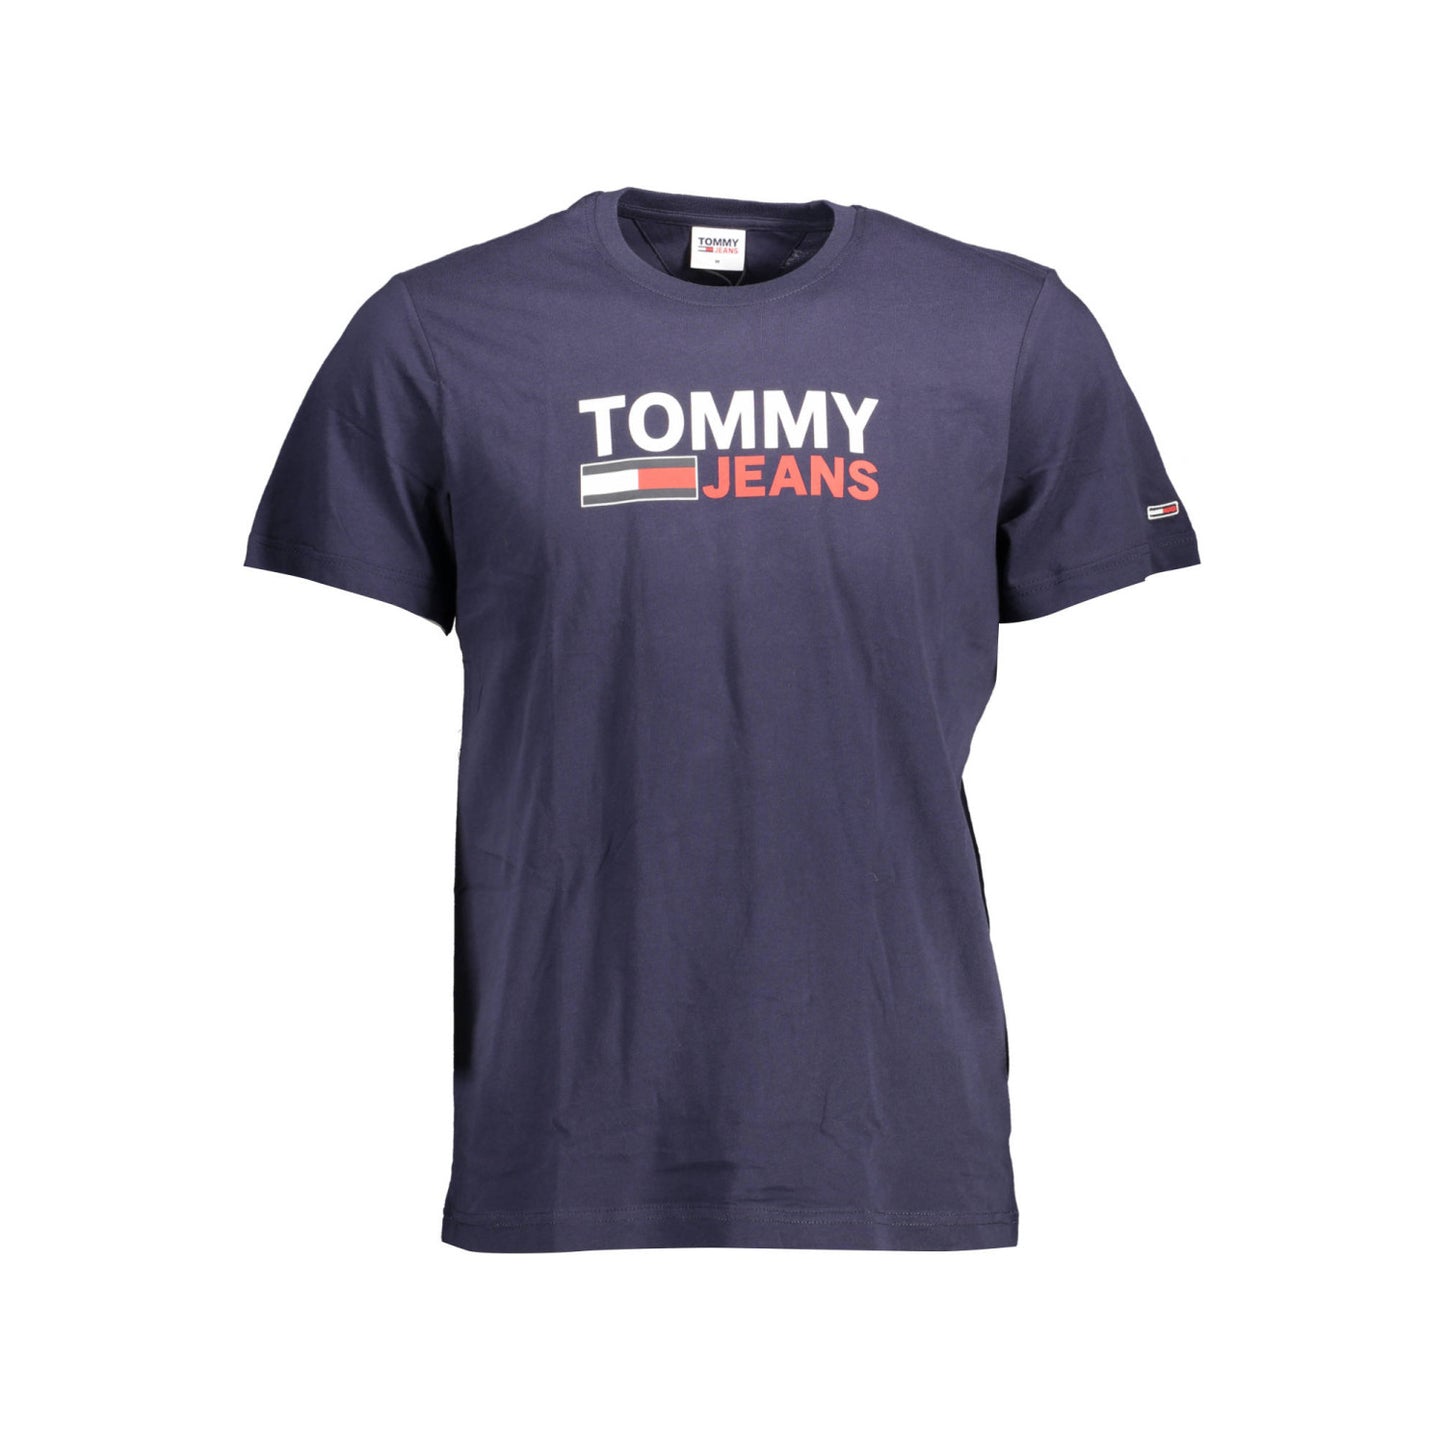 TOMMY HILFIGER T-SHIRT WITH LOGO